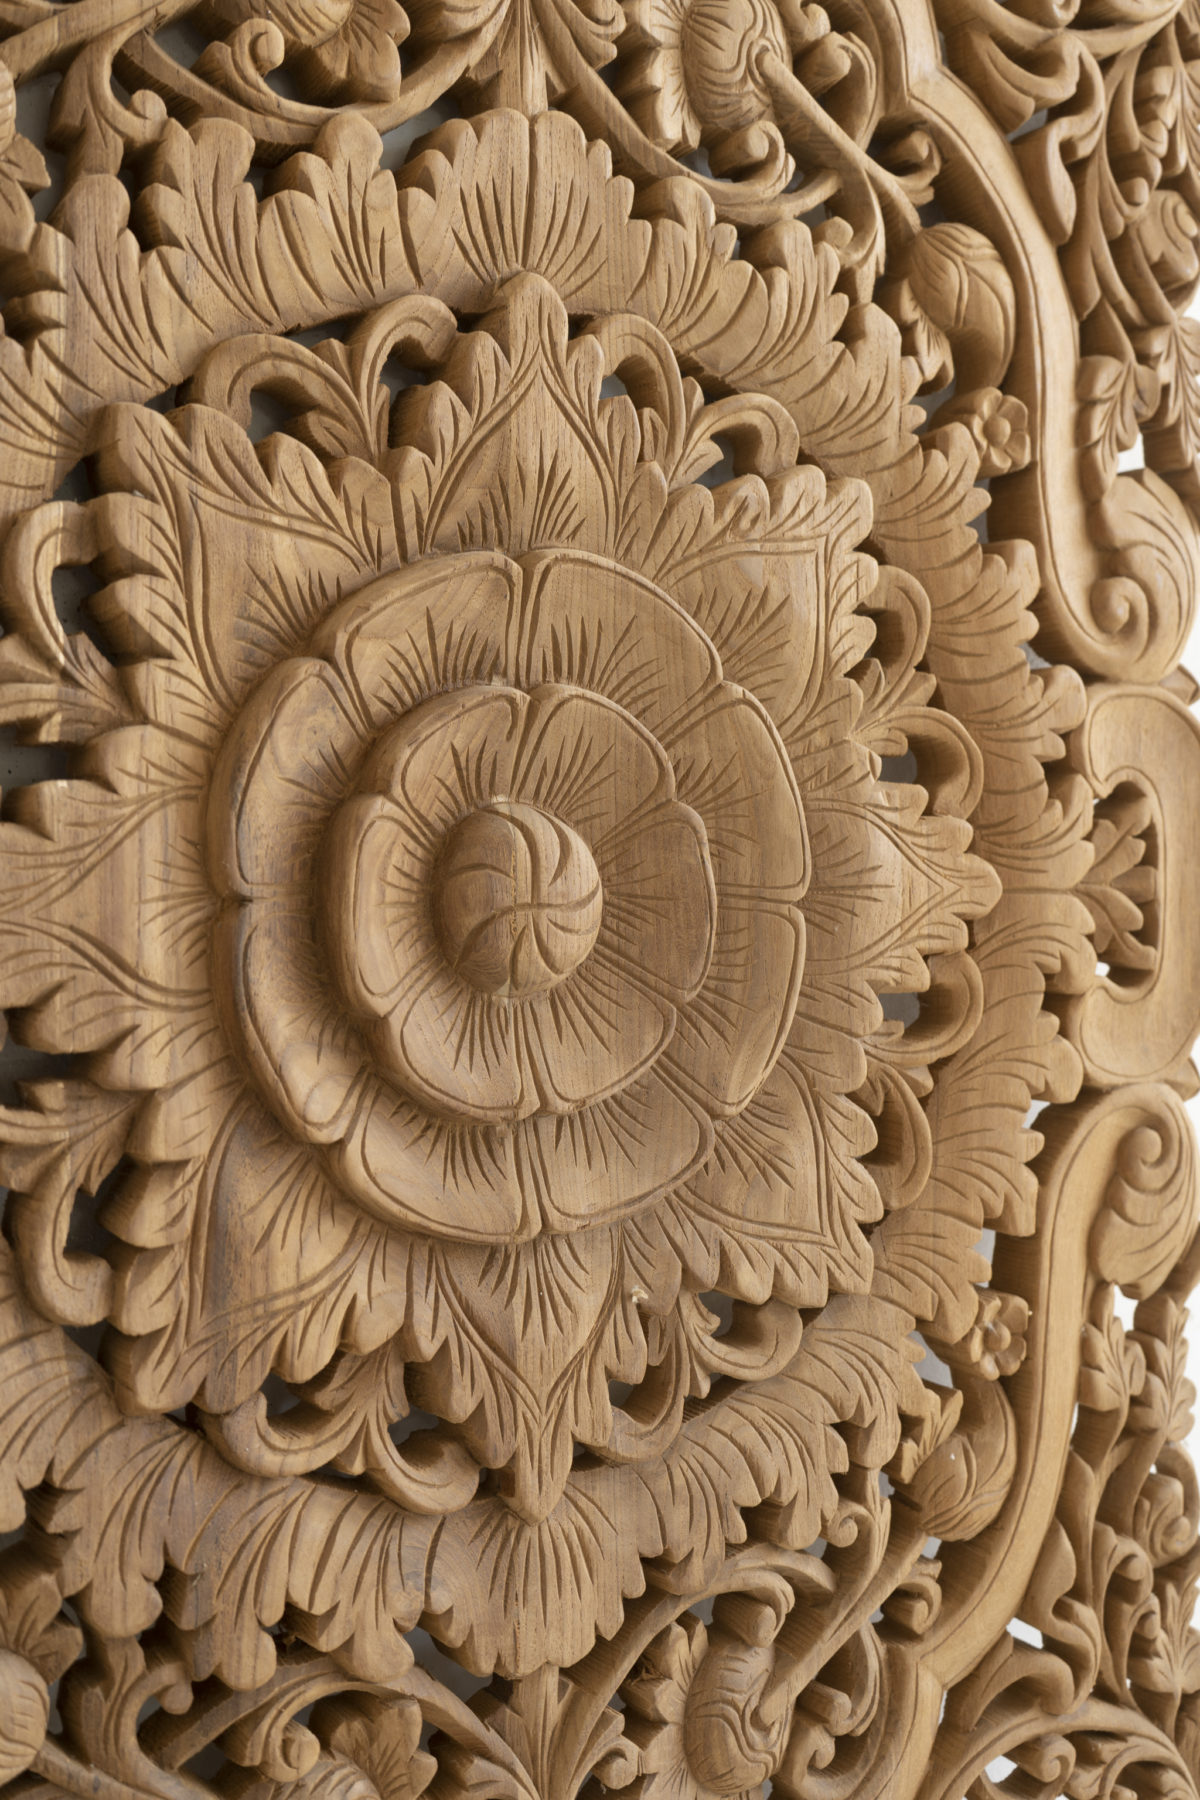 Natural wood carving unstained